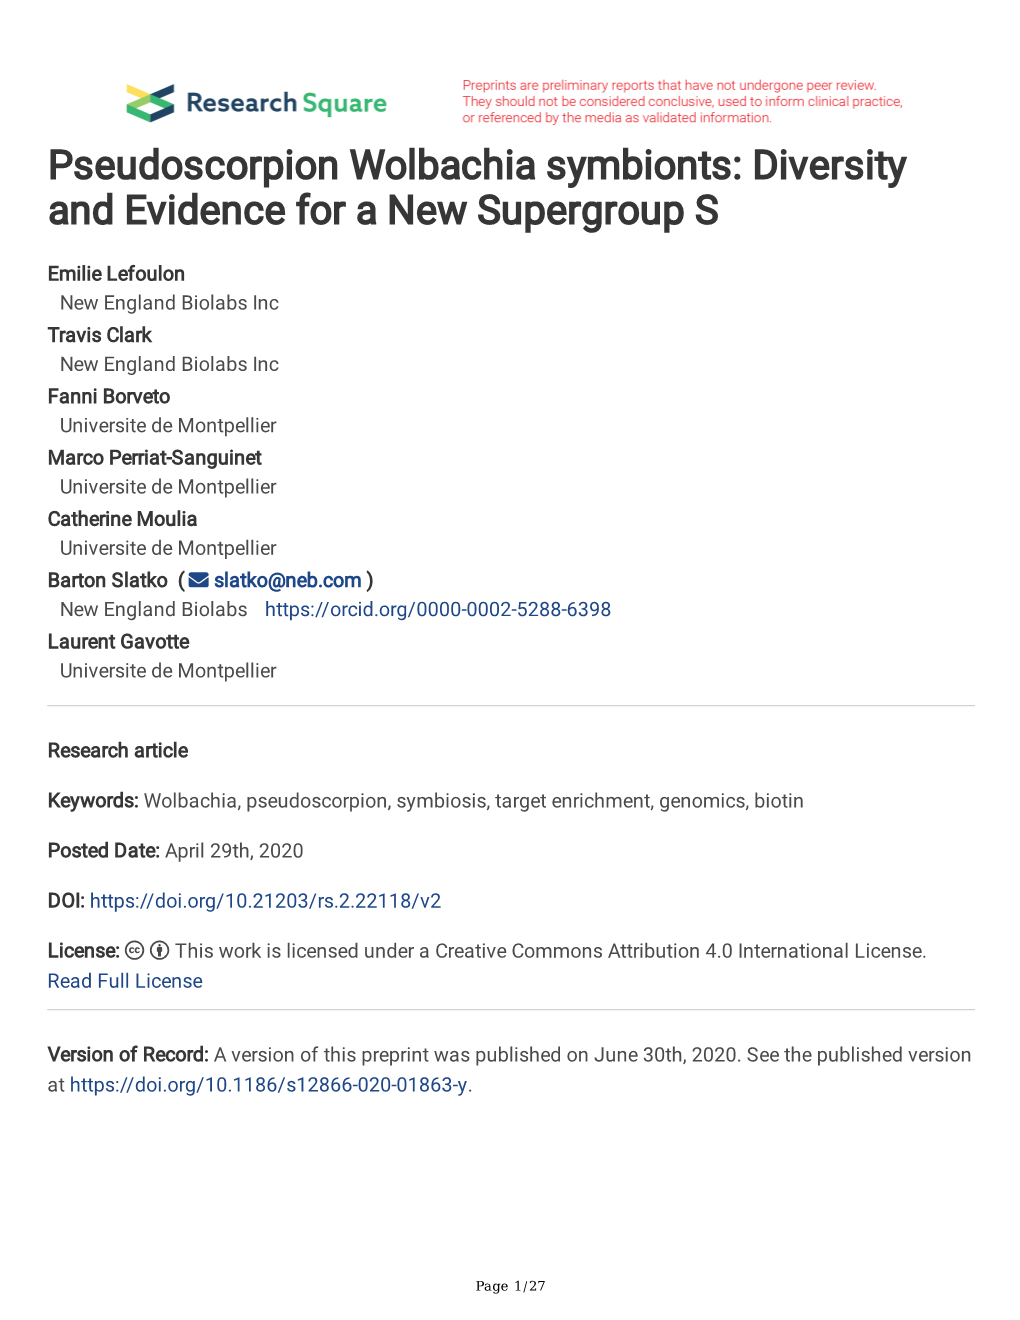 Pseudoscorpion Wolbachia Symbionts: Diversity and Evidence for a New Supergroup S